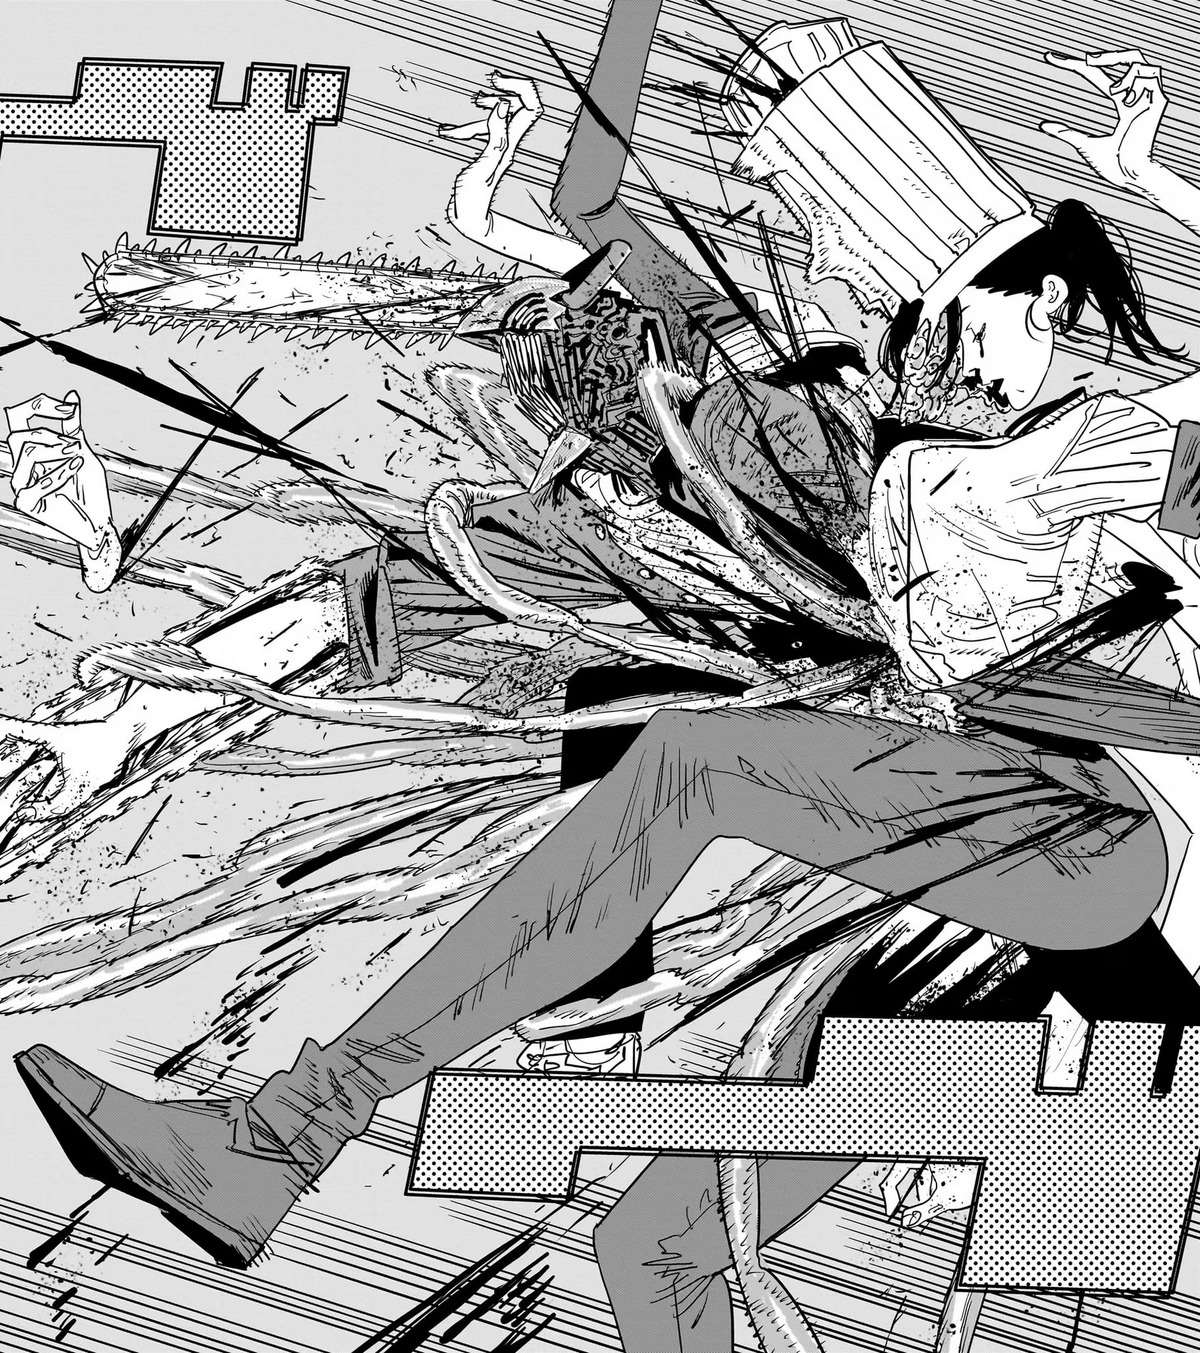 Chainsaw Man Cliffhanger Strikes Out With an Unforgivable Death